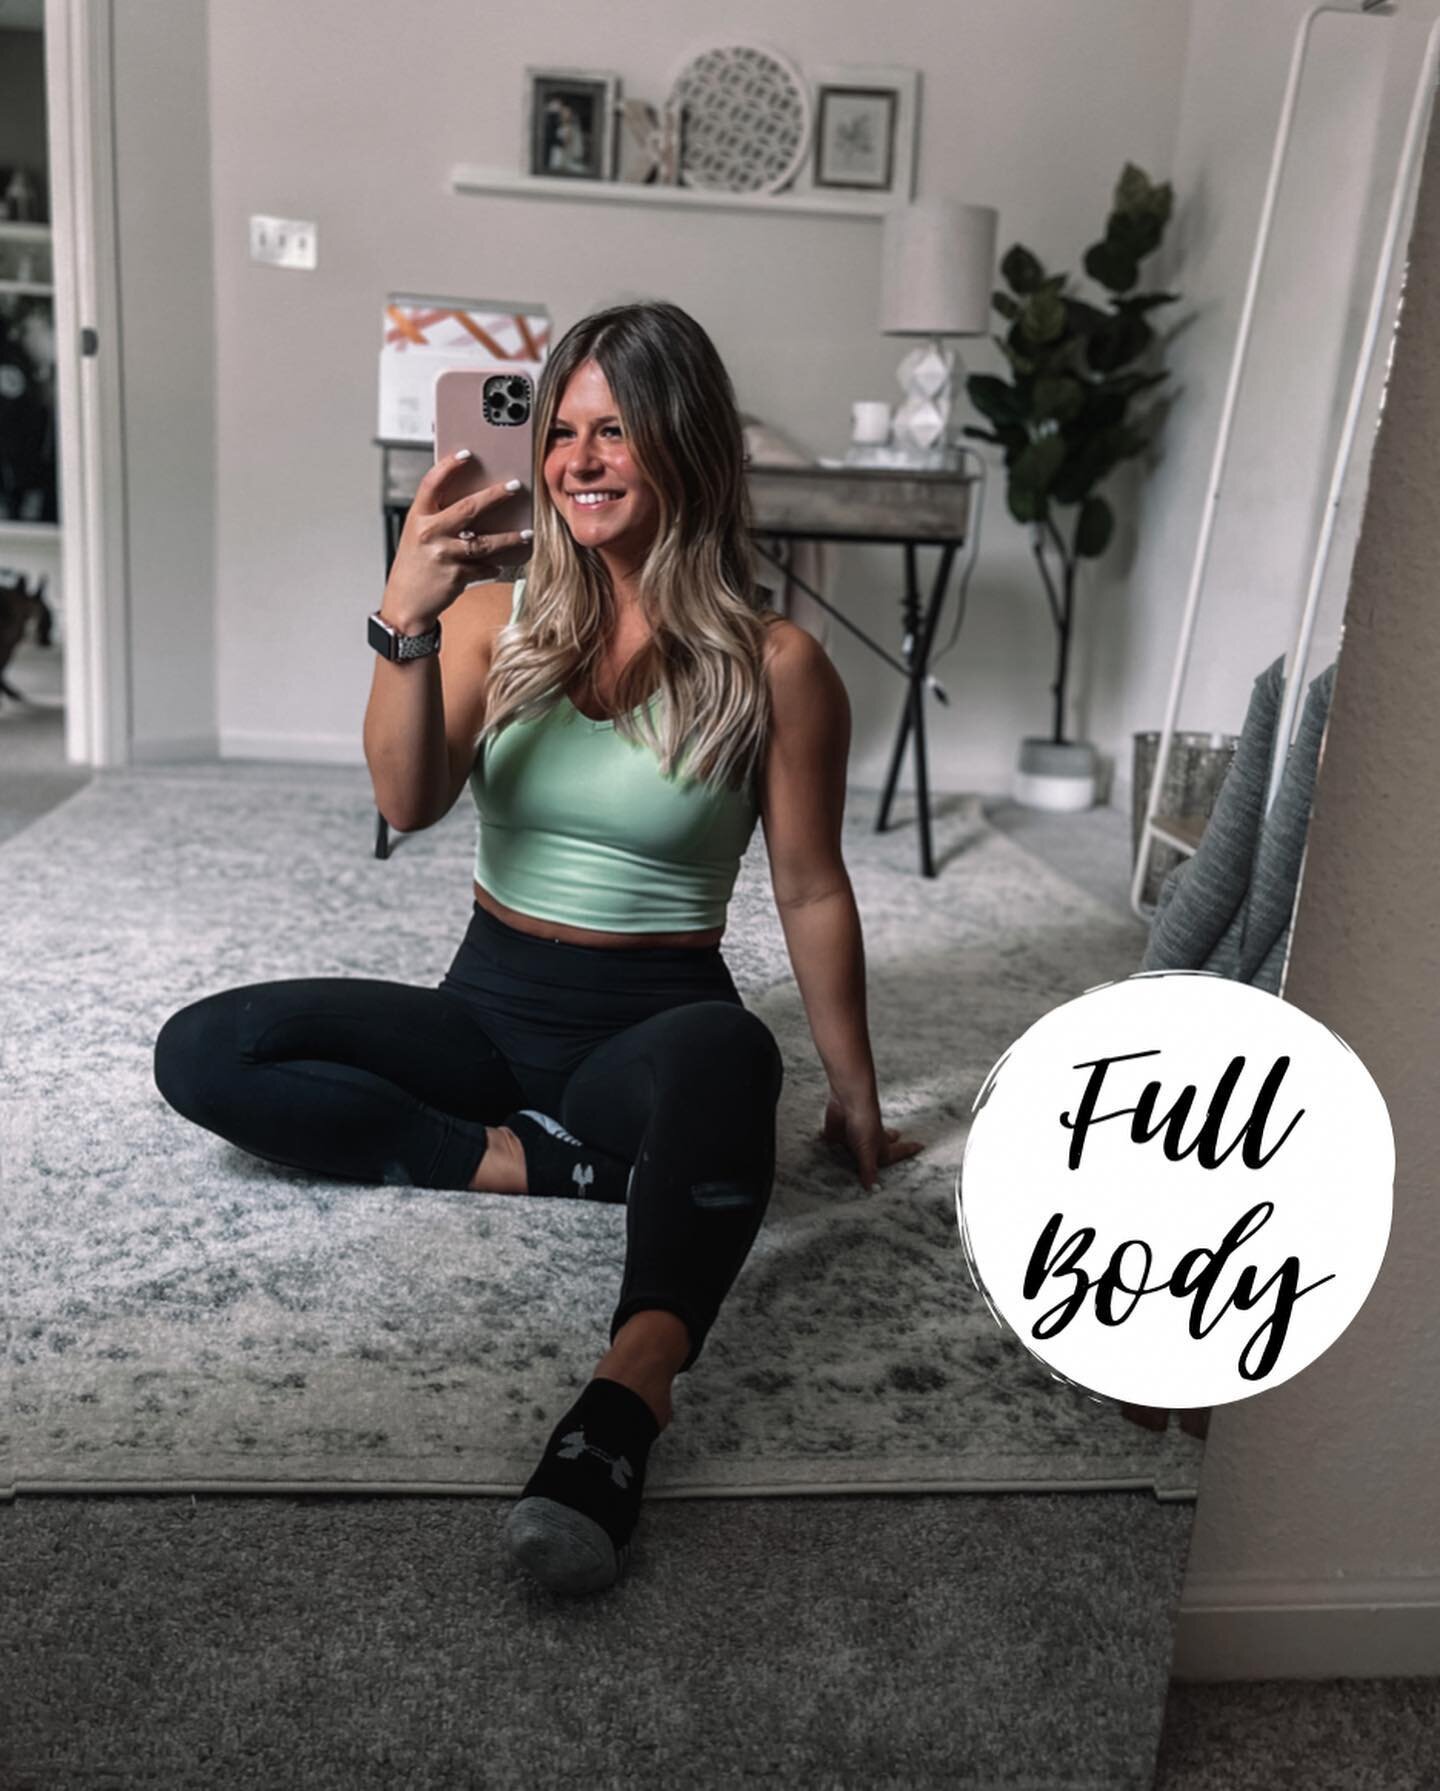 FULL BODY 👏🏼
I love doing a full body day once a week! It&rsquo;s light weight, circuit style, &amp; it a nice change up! Give it a try! Just make sure to hit every muscle group once! Don&rsquo;t have a cable? Use a long loop resistance band or eve